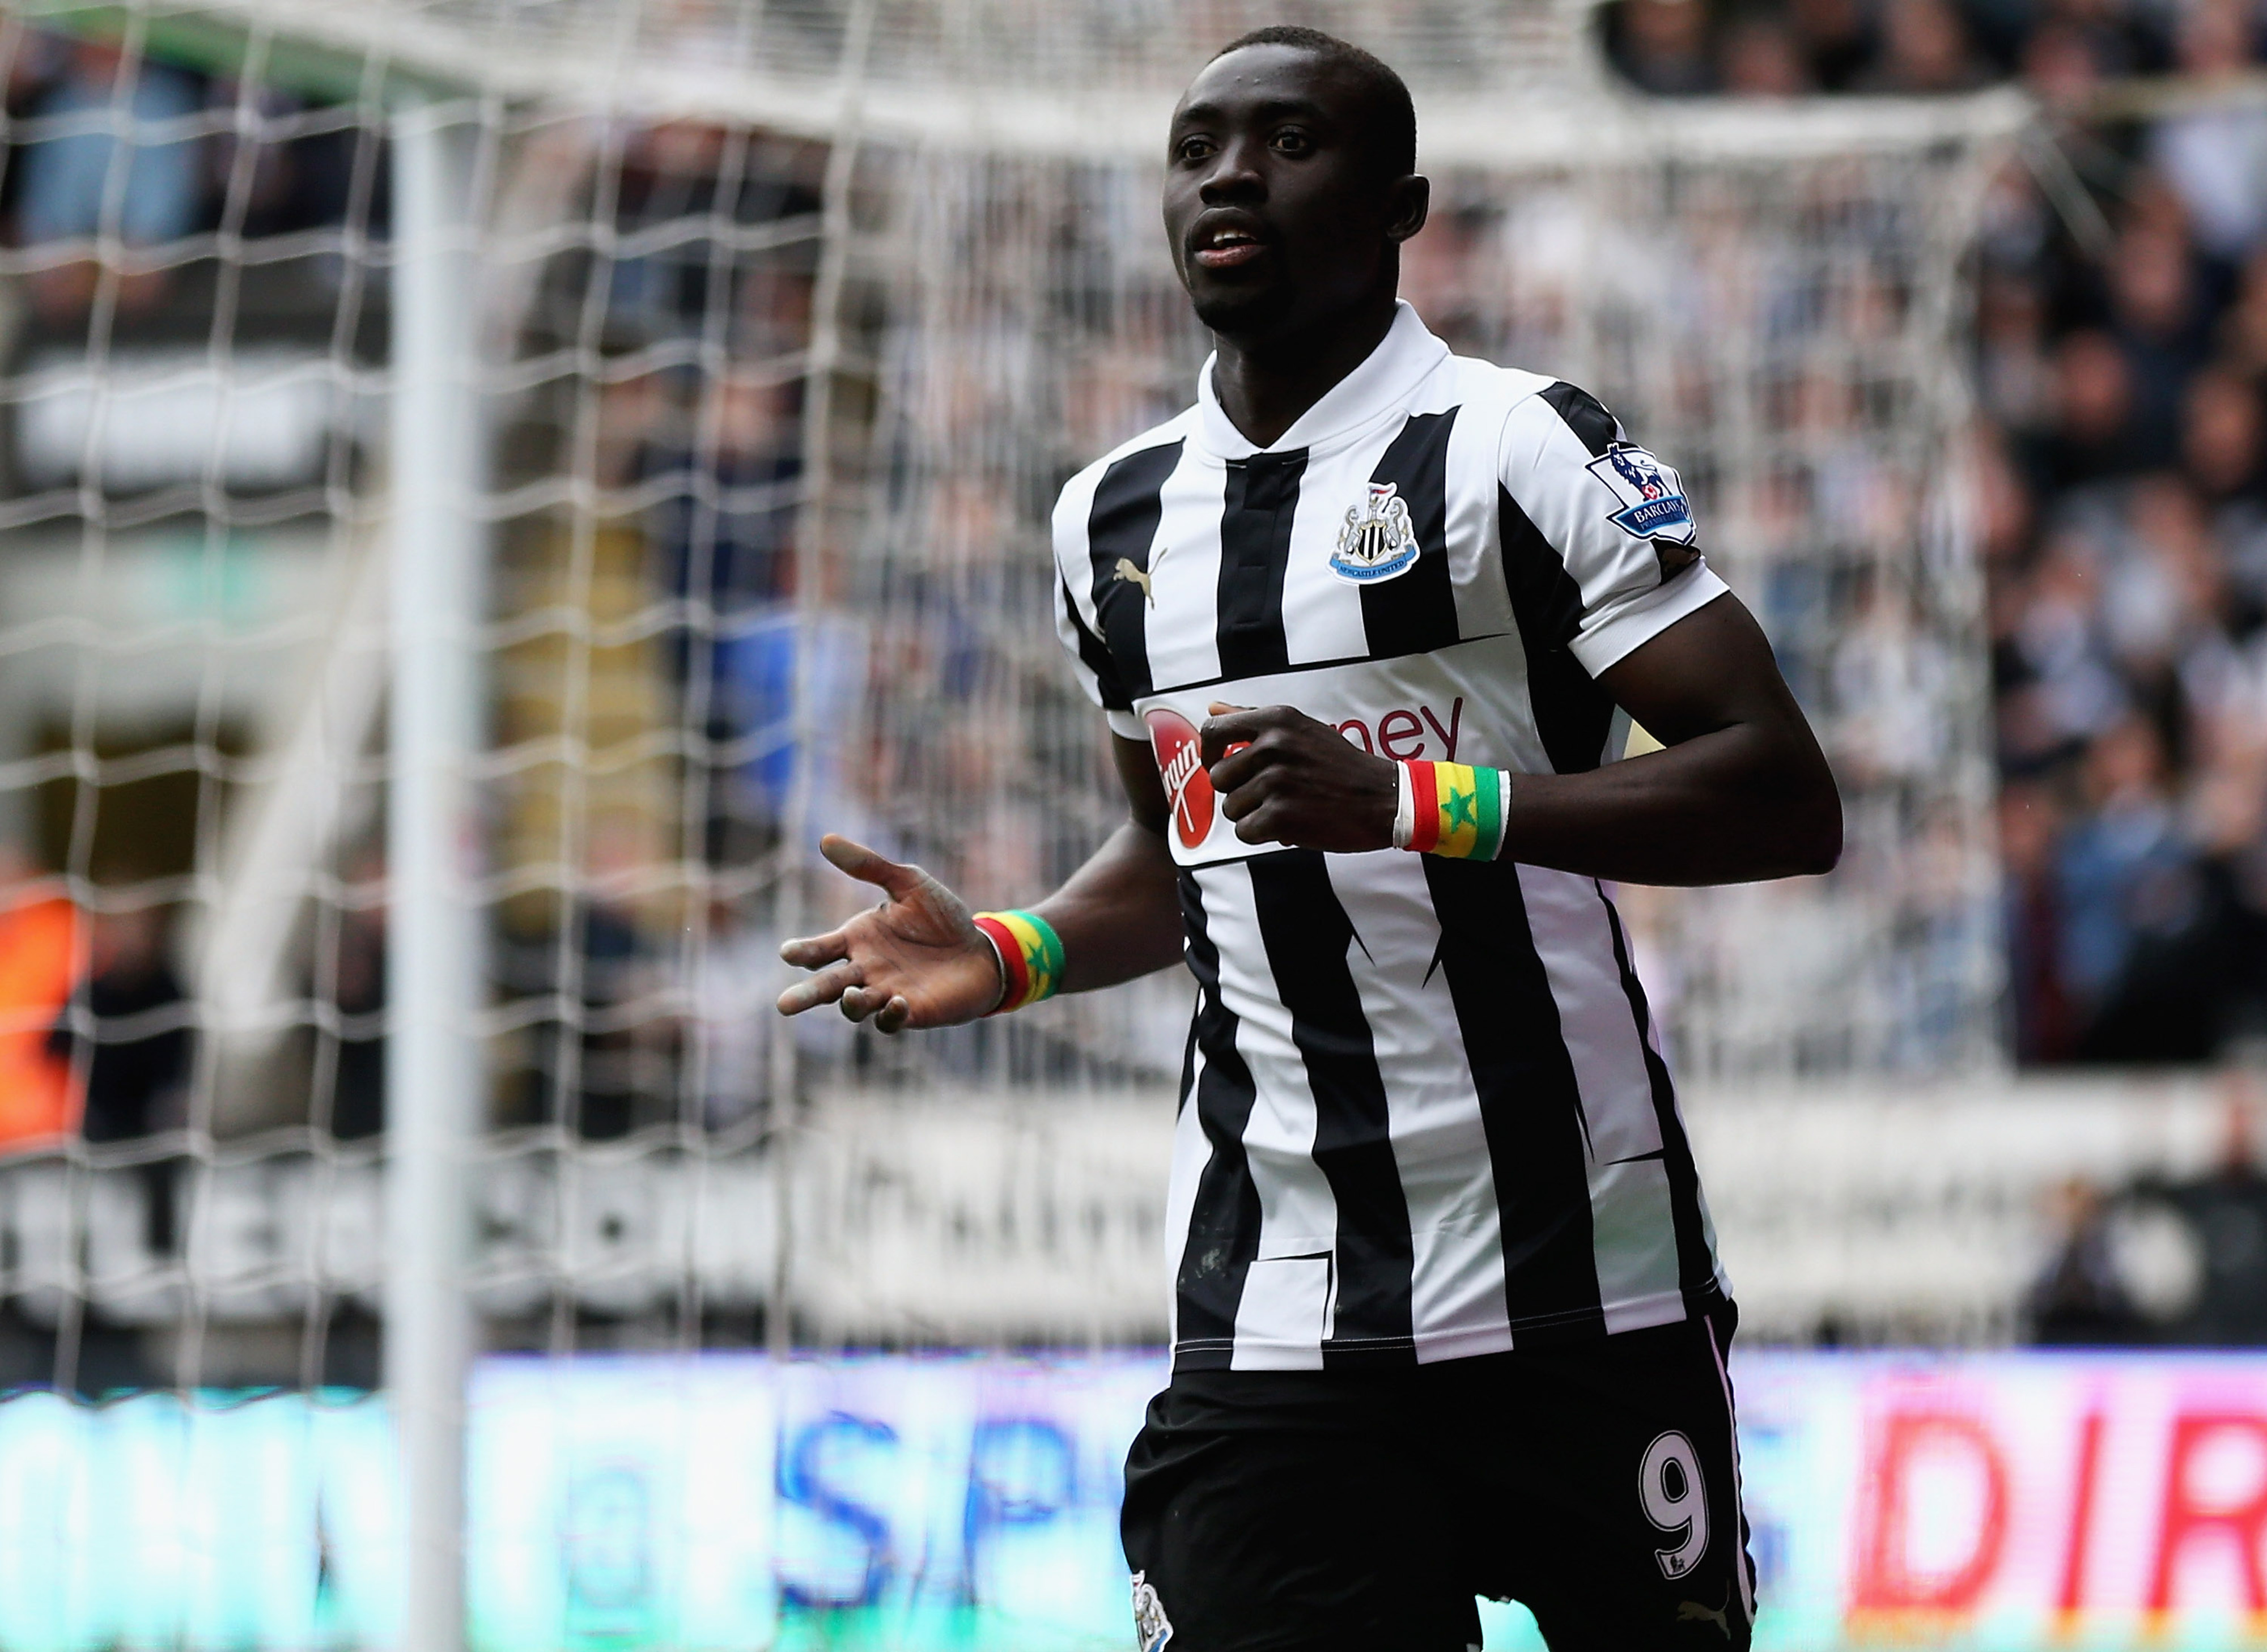 Cisse looks to add to his tally for the season